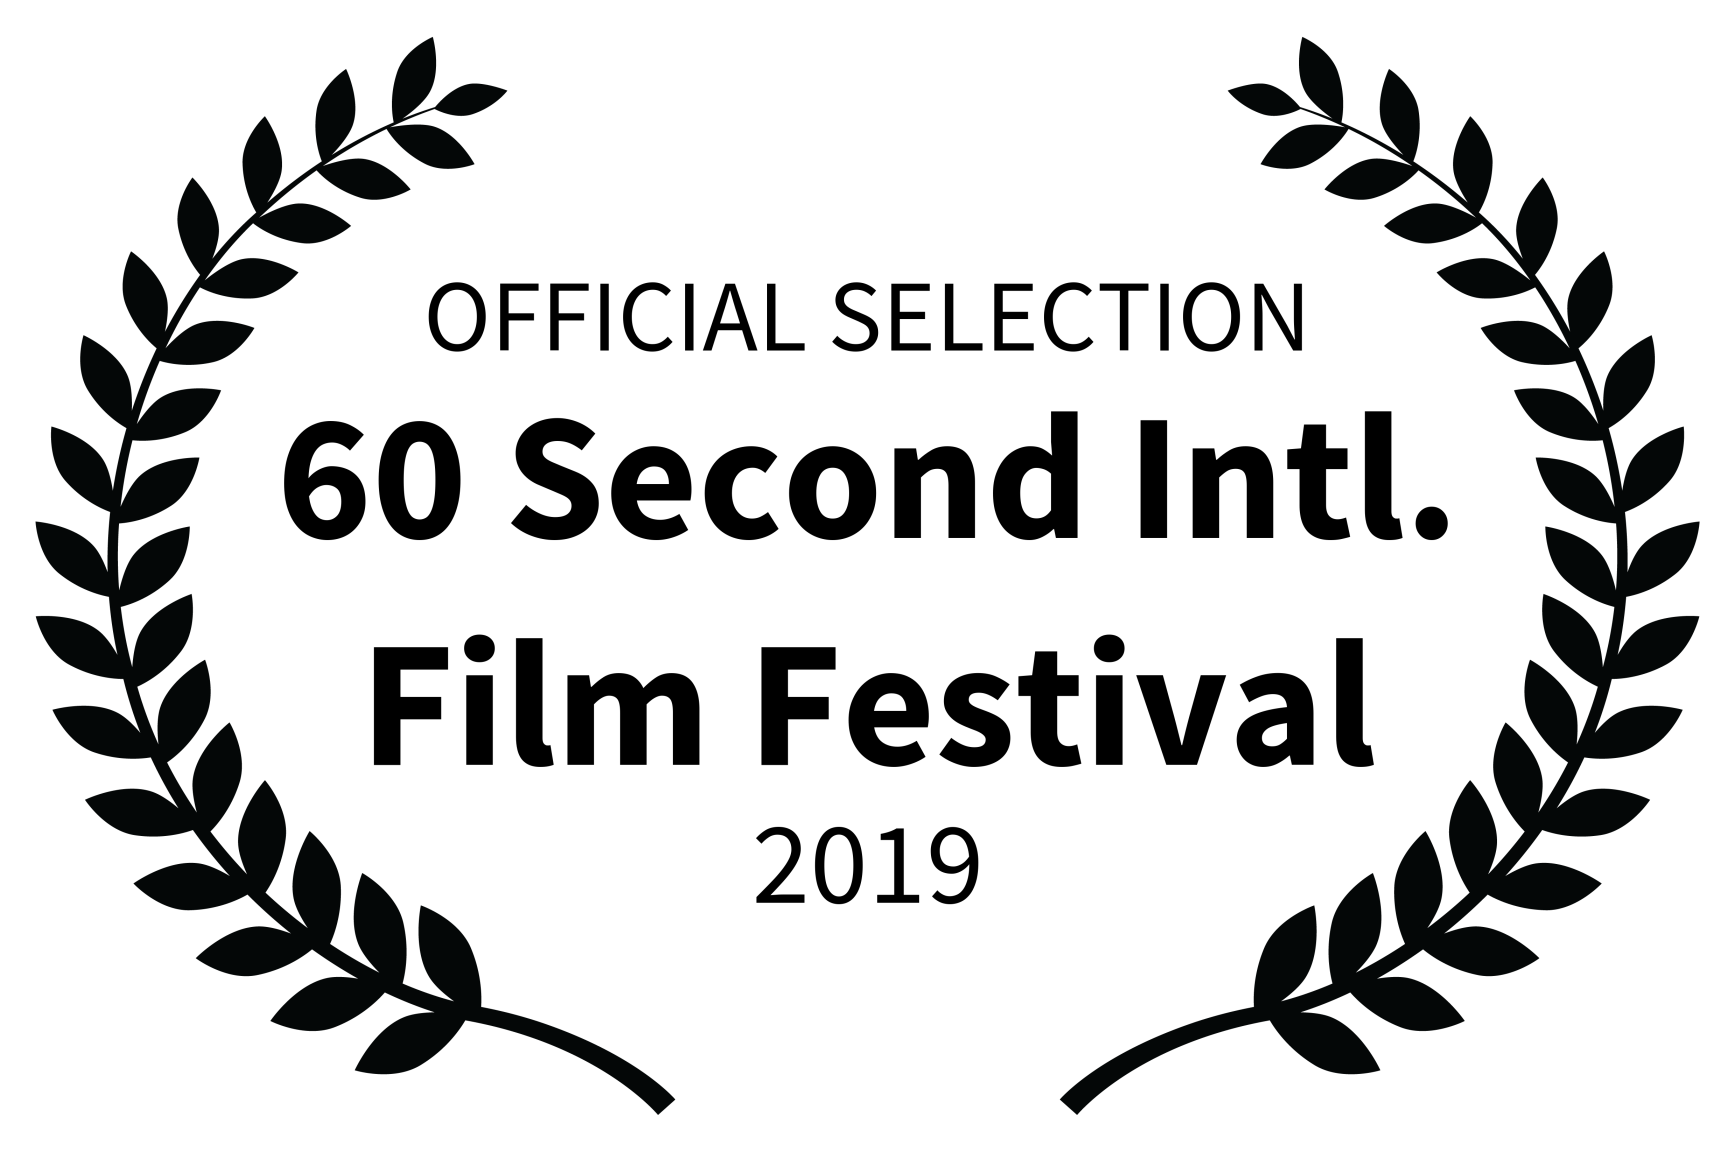 OFFICIAL SELECTION - 60 Second Intl. Film Festival - 2019 (1)